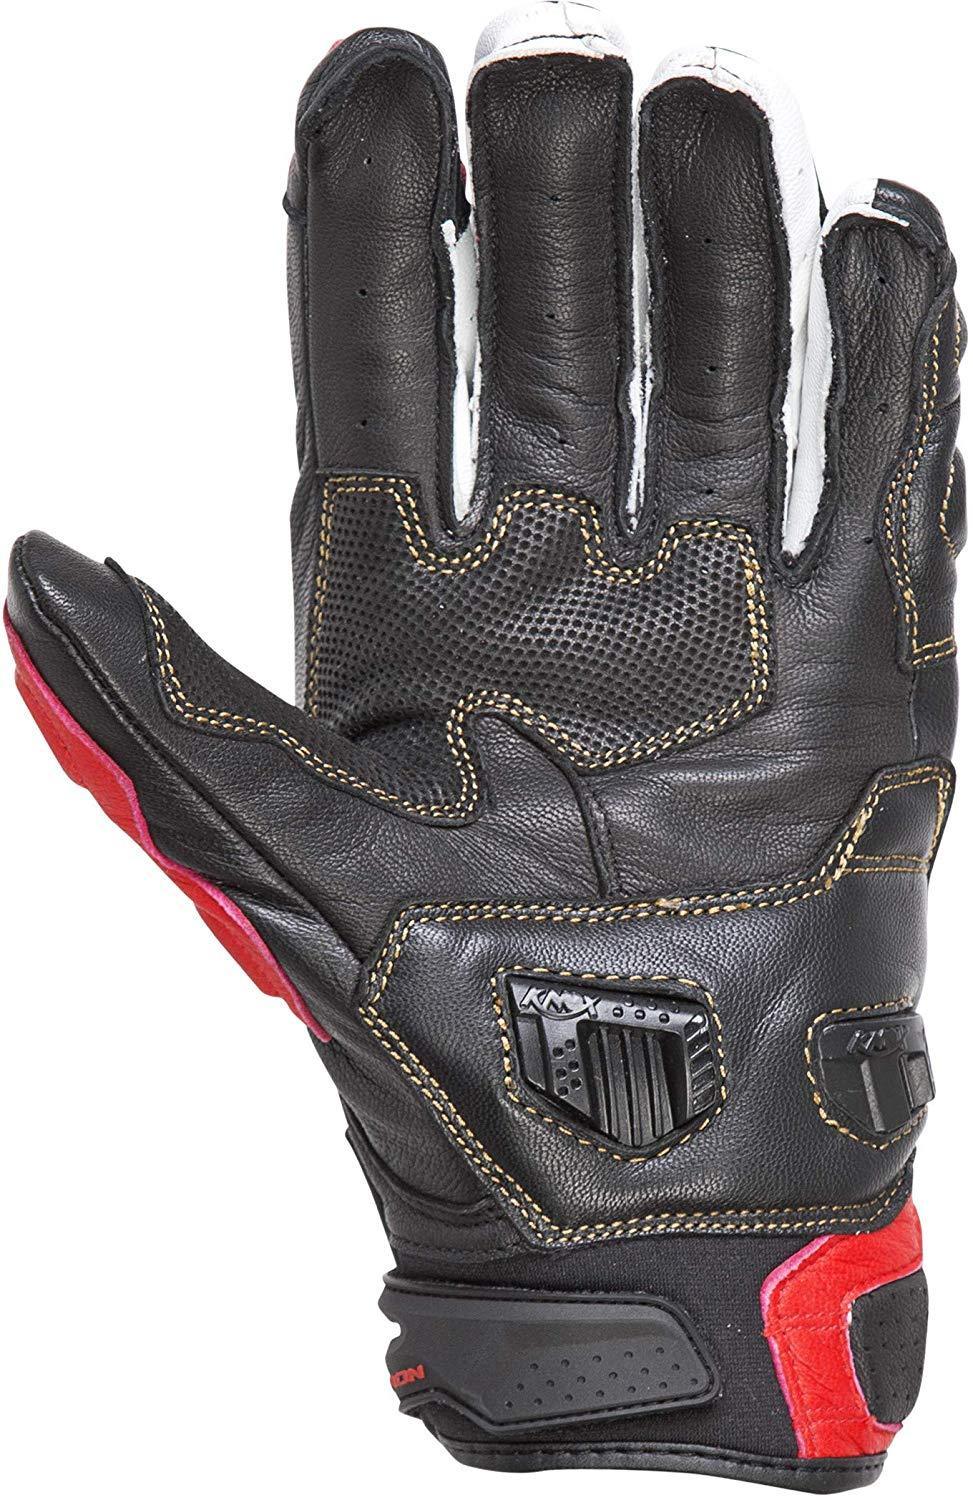 Scorpion SGS MKII Red Leather Gloves